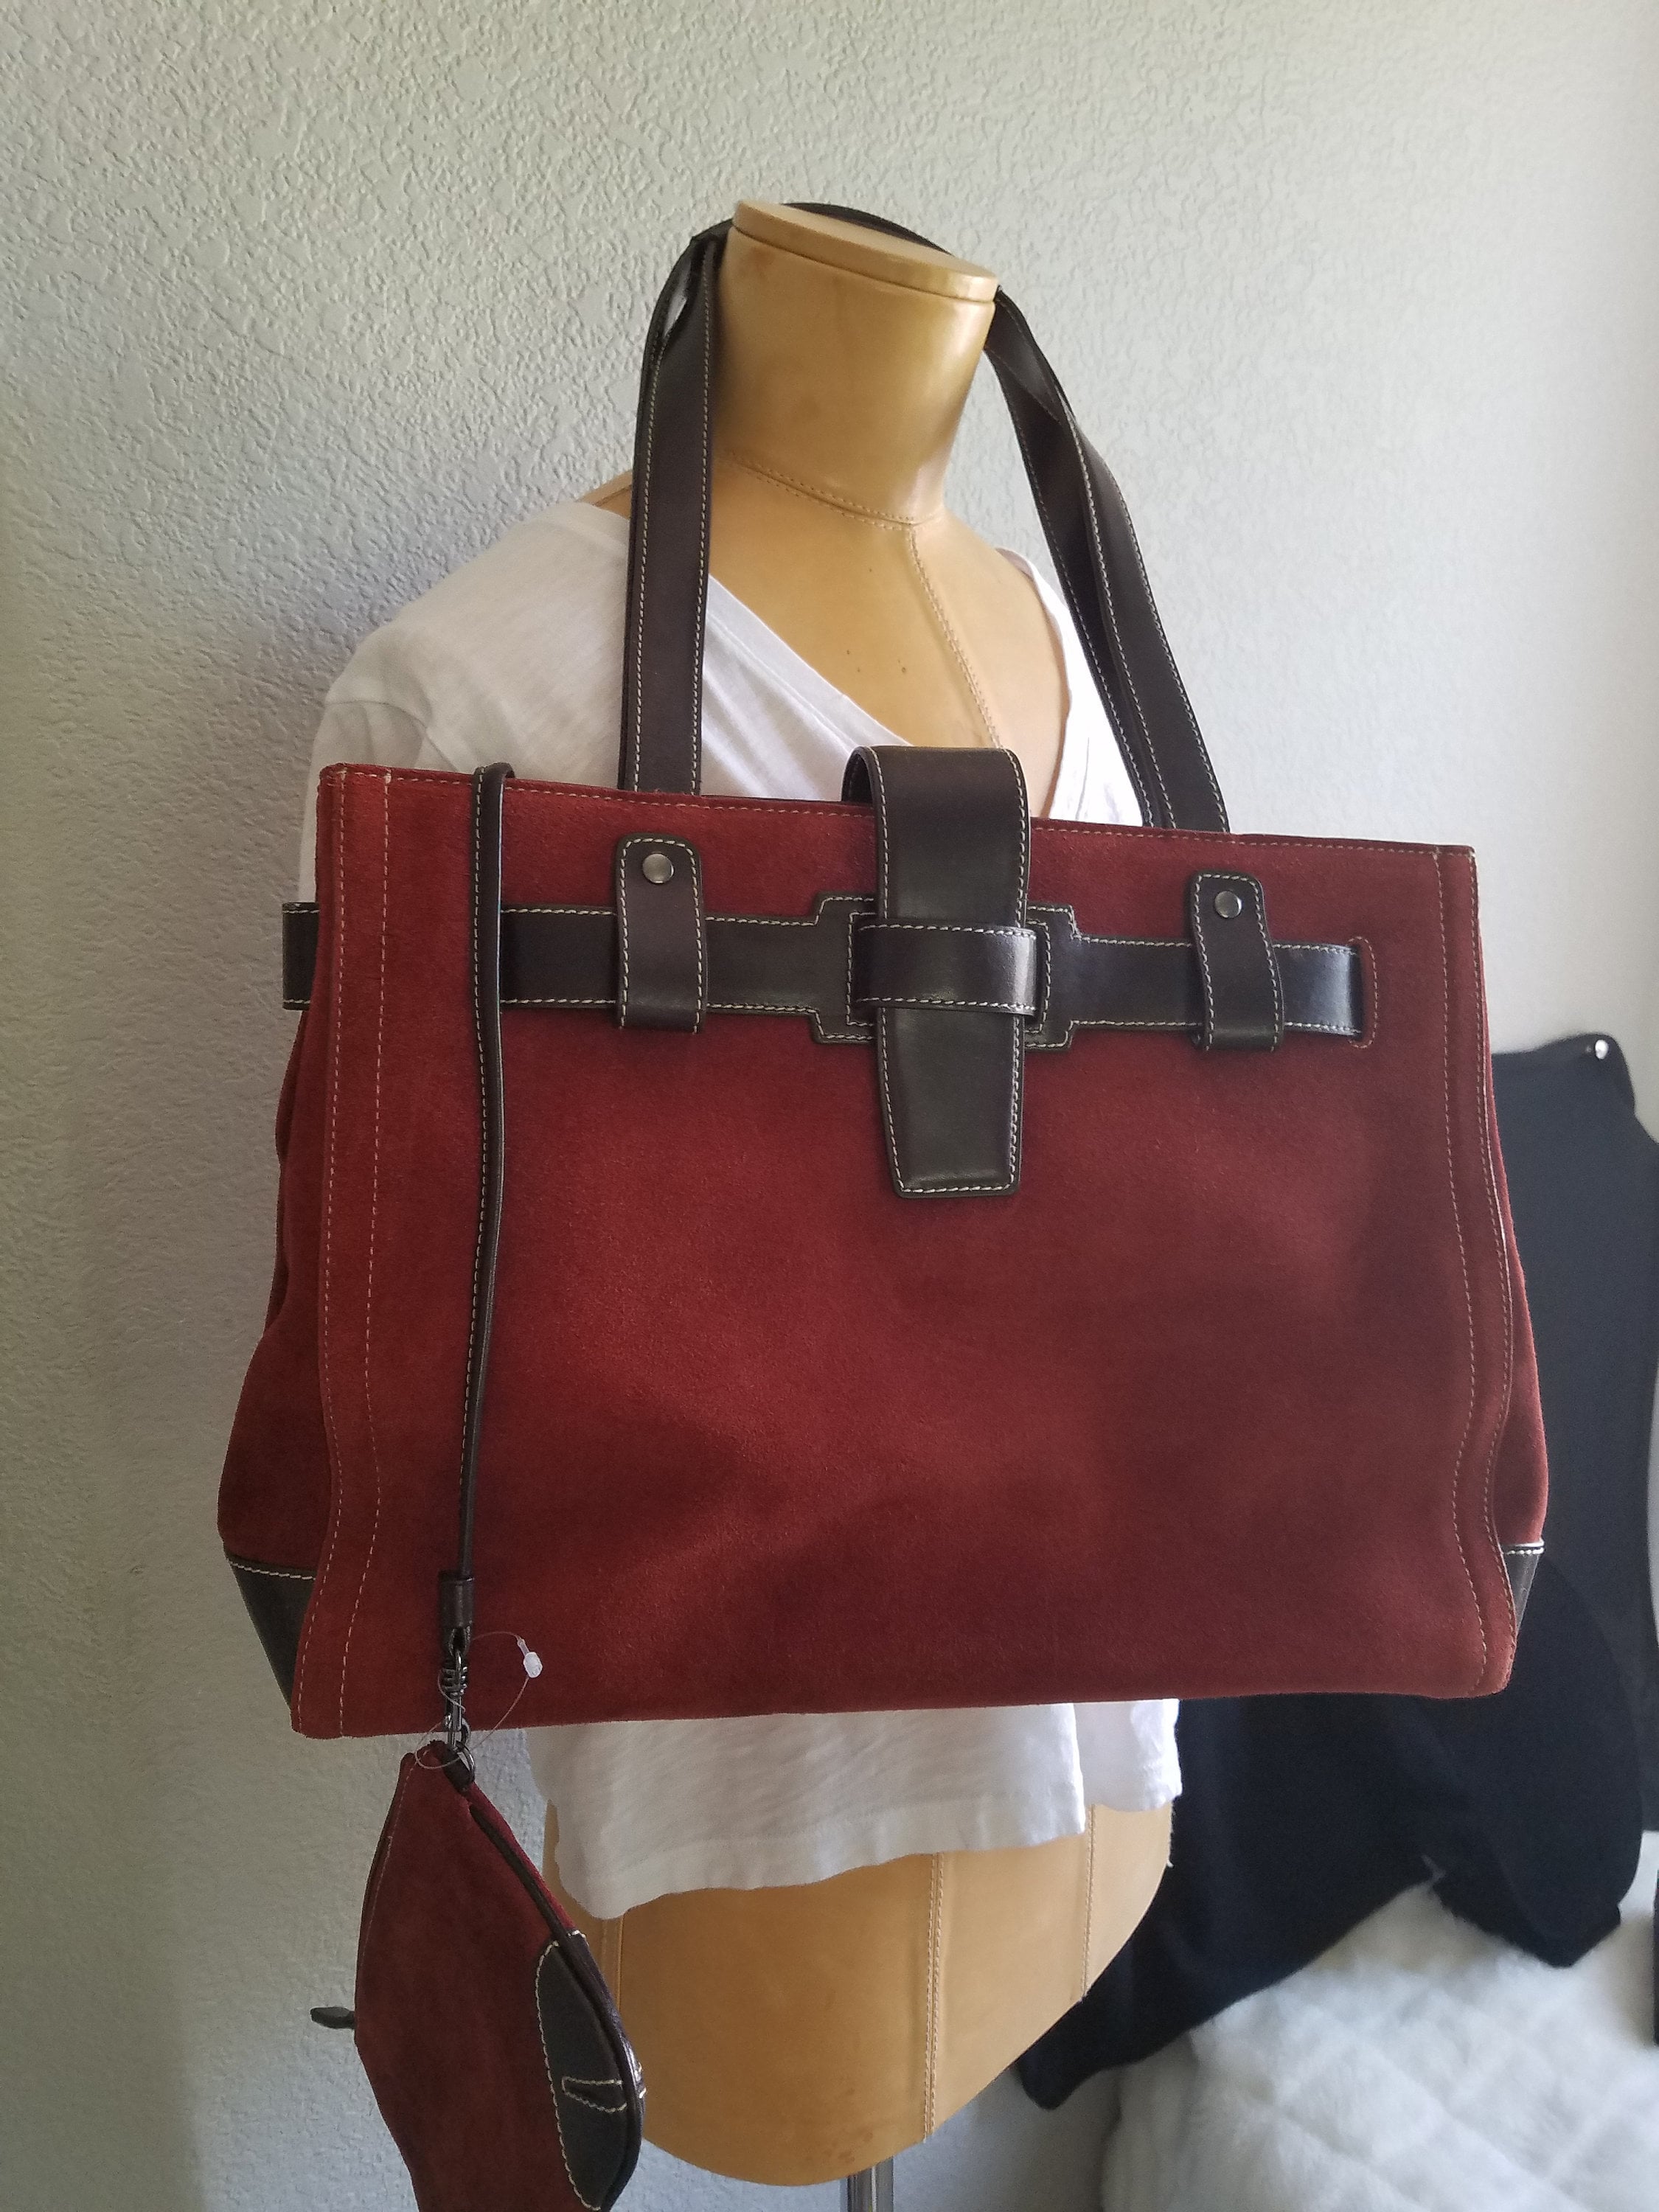 franklin covey tote